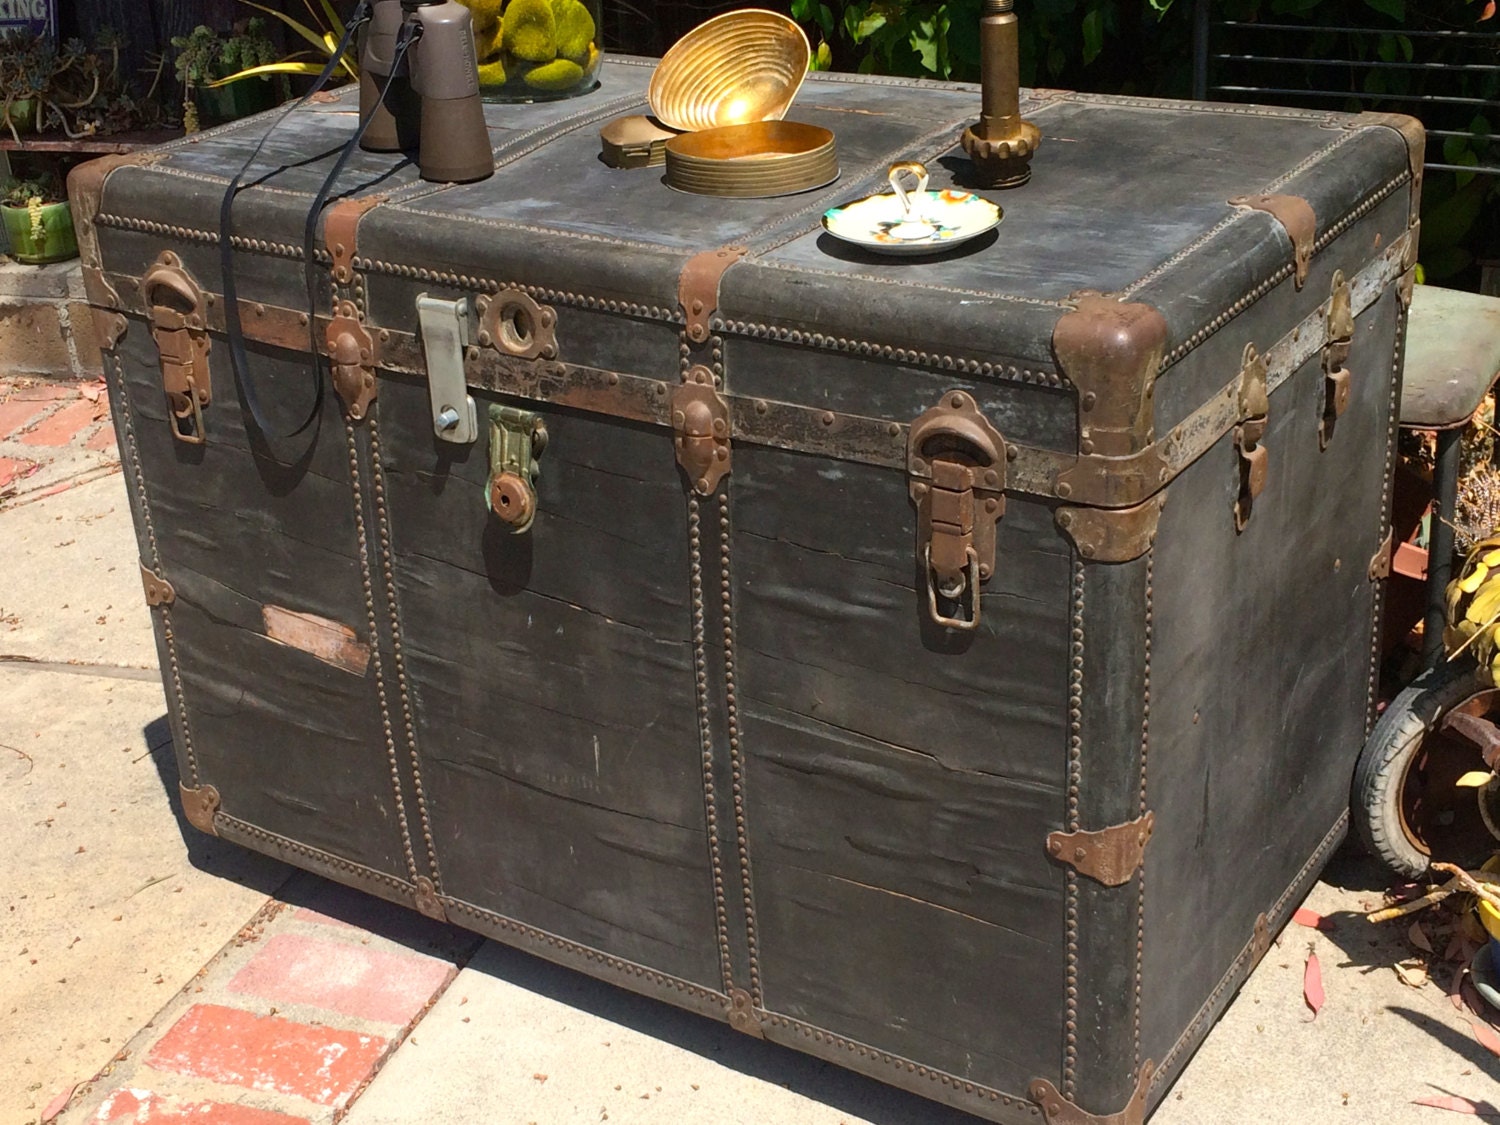 Steamer Trunk Coffee Table In Living Room